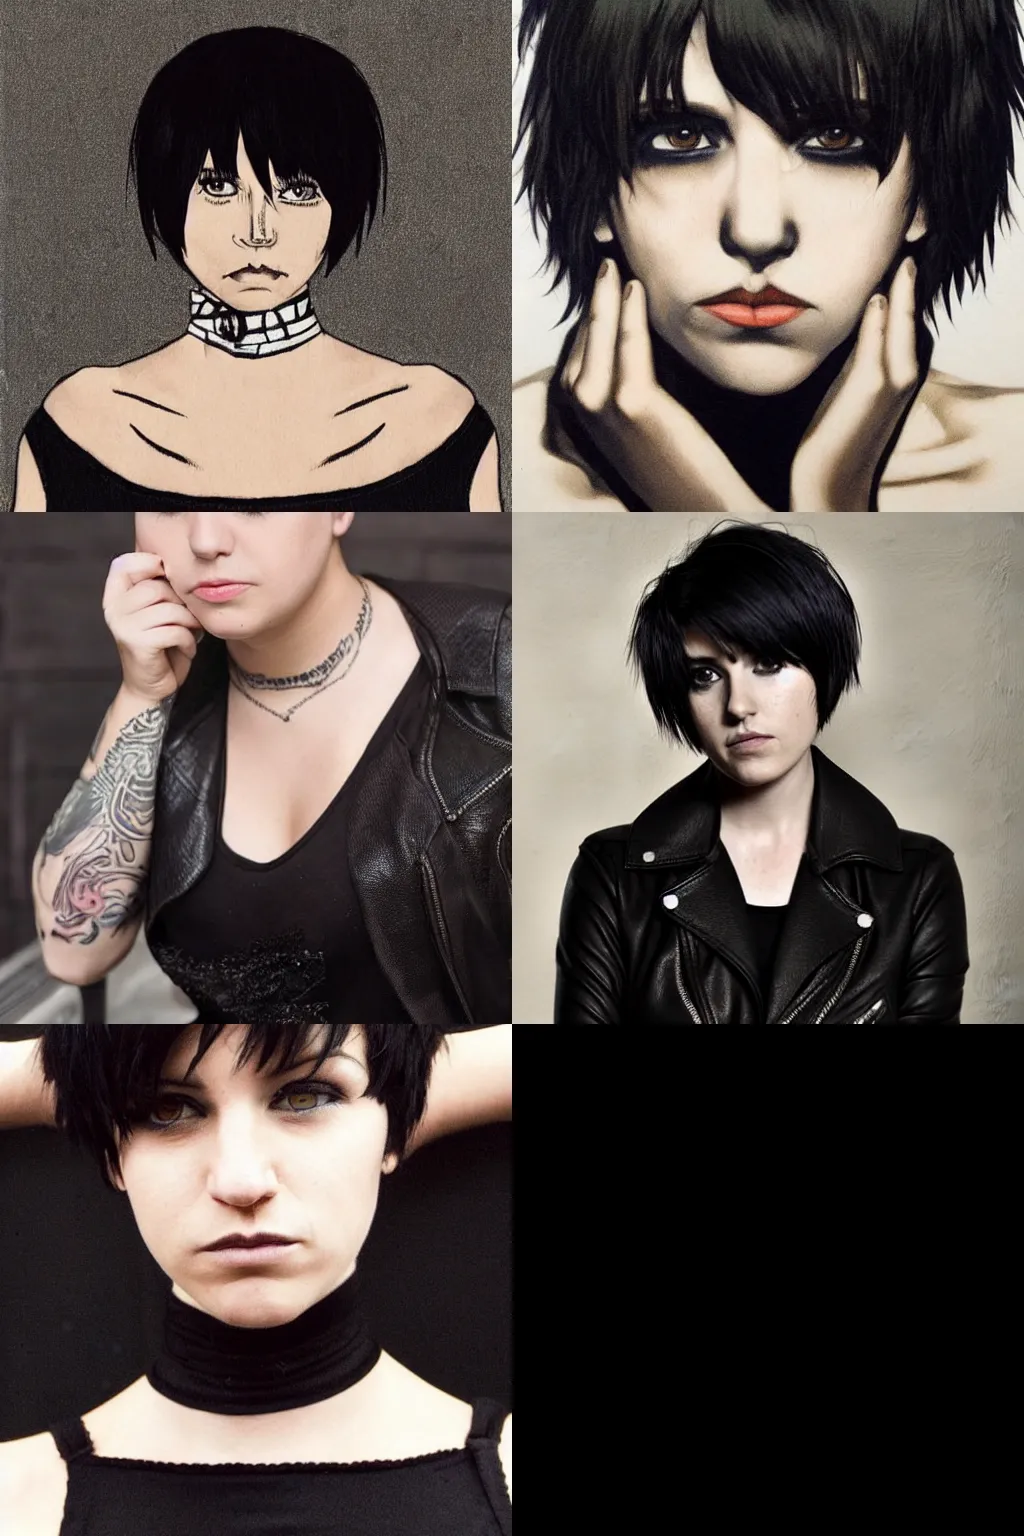 Prompt: an emo portrait by arthur adams. her hair is dark brown and cut into a short, messy pixie cut. she has a slightly rounded face, with a pointed chin, large entirely - black eyes, and a small nose. she is wearing a black tank top, a black leather jacket, a black knee - length skirt, and a black choker..